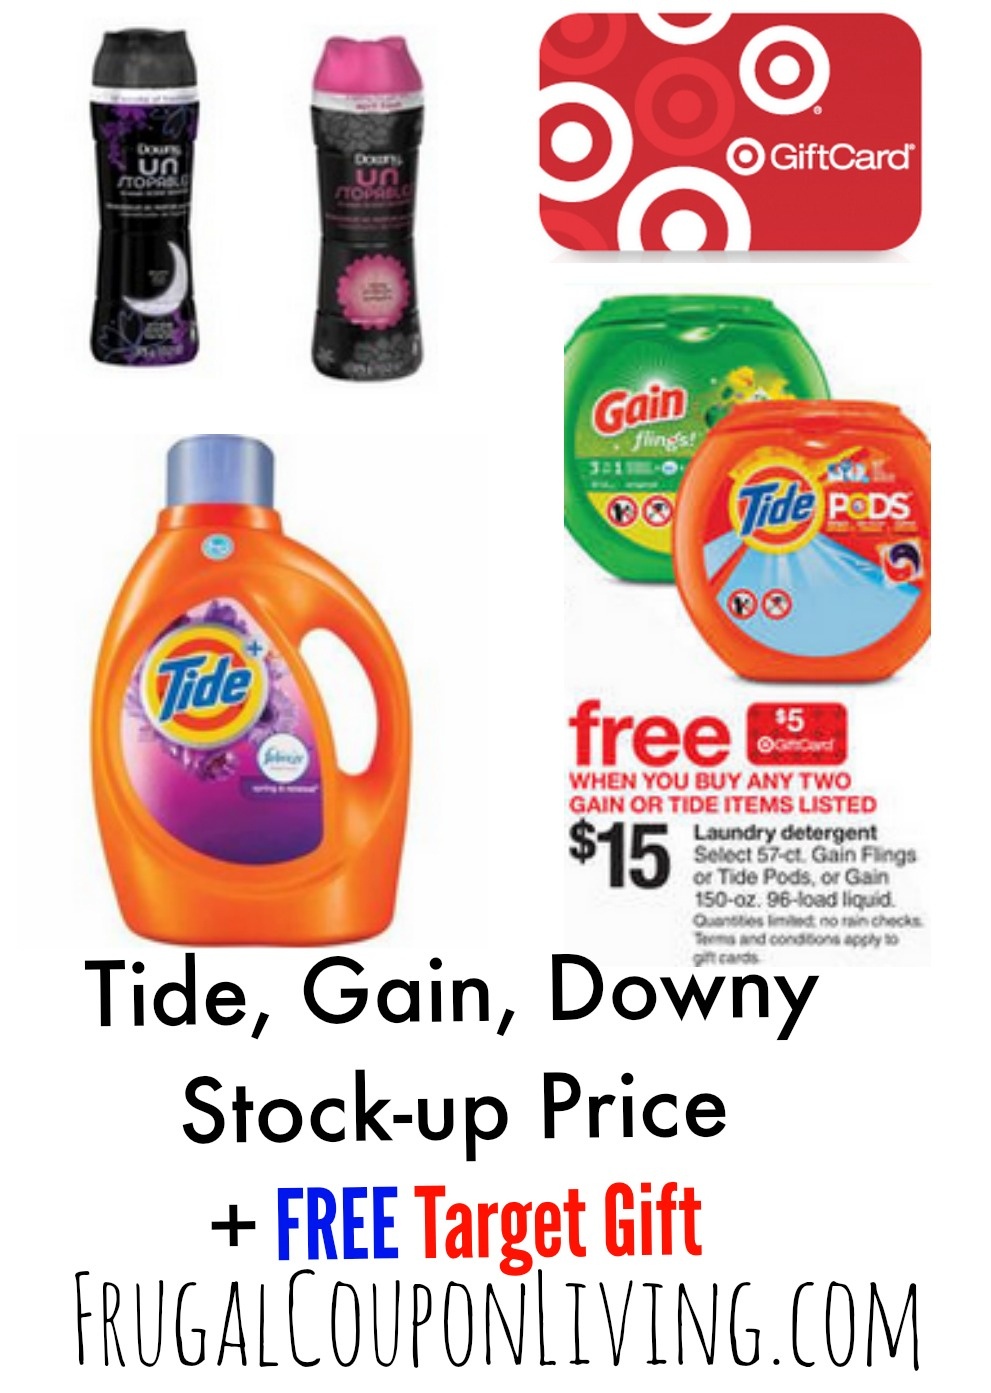 Target Laundry Detergent Deals Tide Downy Printable Laundry Miami Beach - Free Detergent Coupons Printable